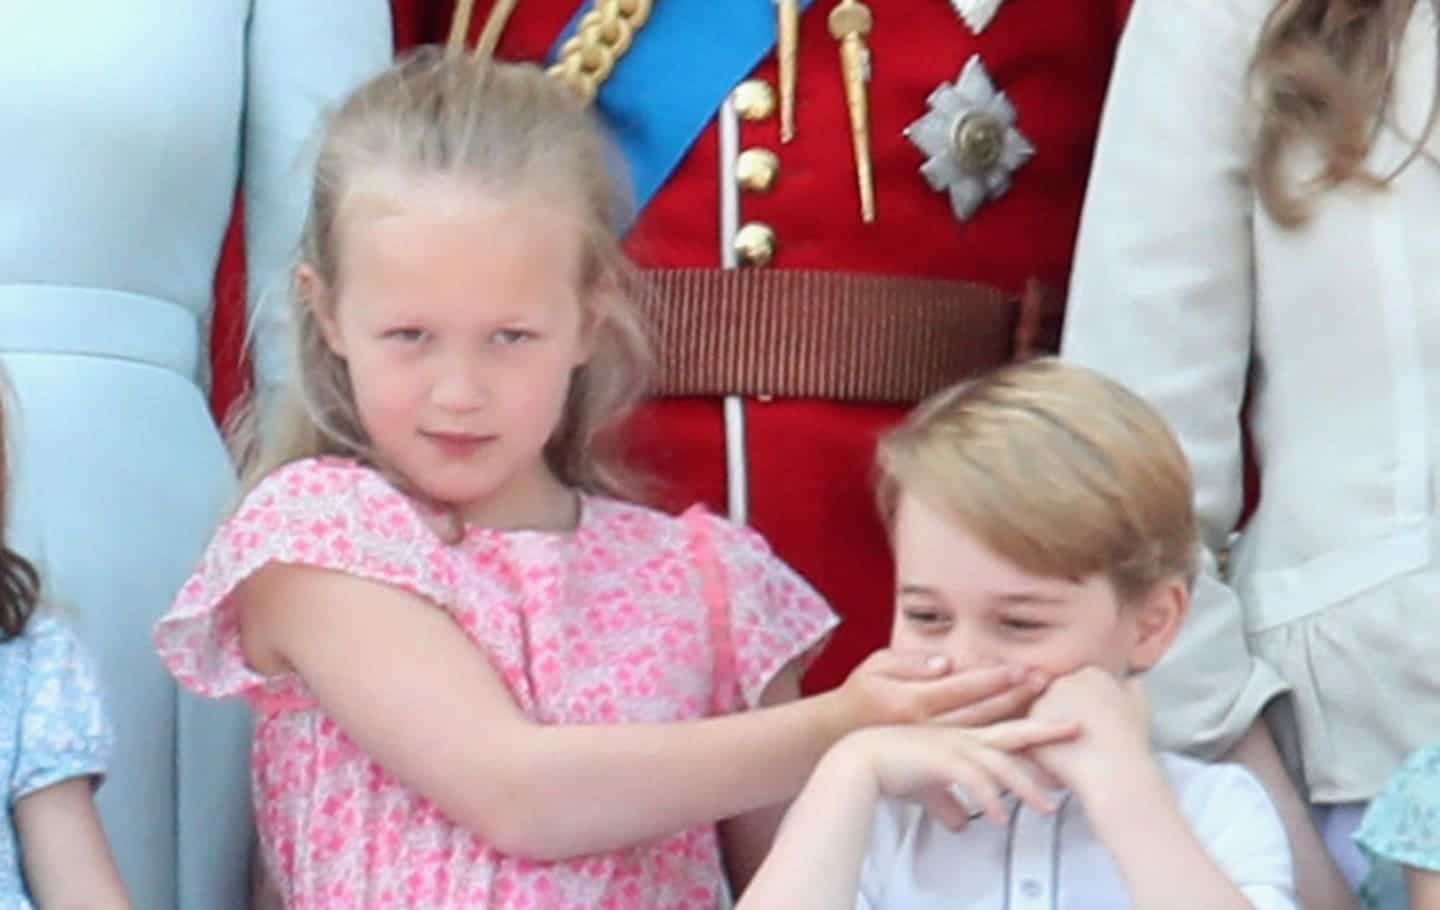 Savannah Phillips covering Prince George's mouth.